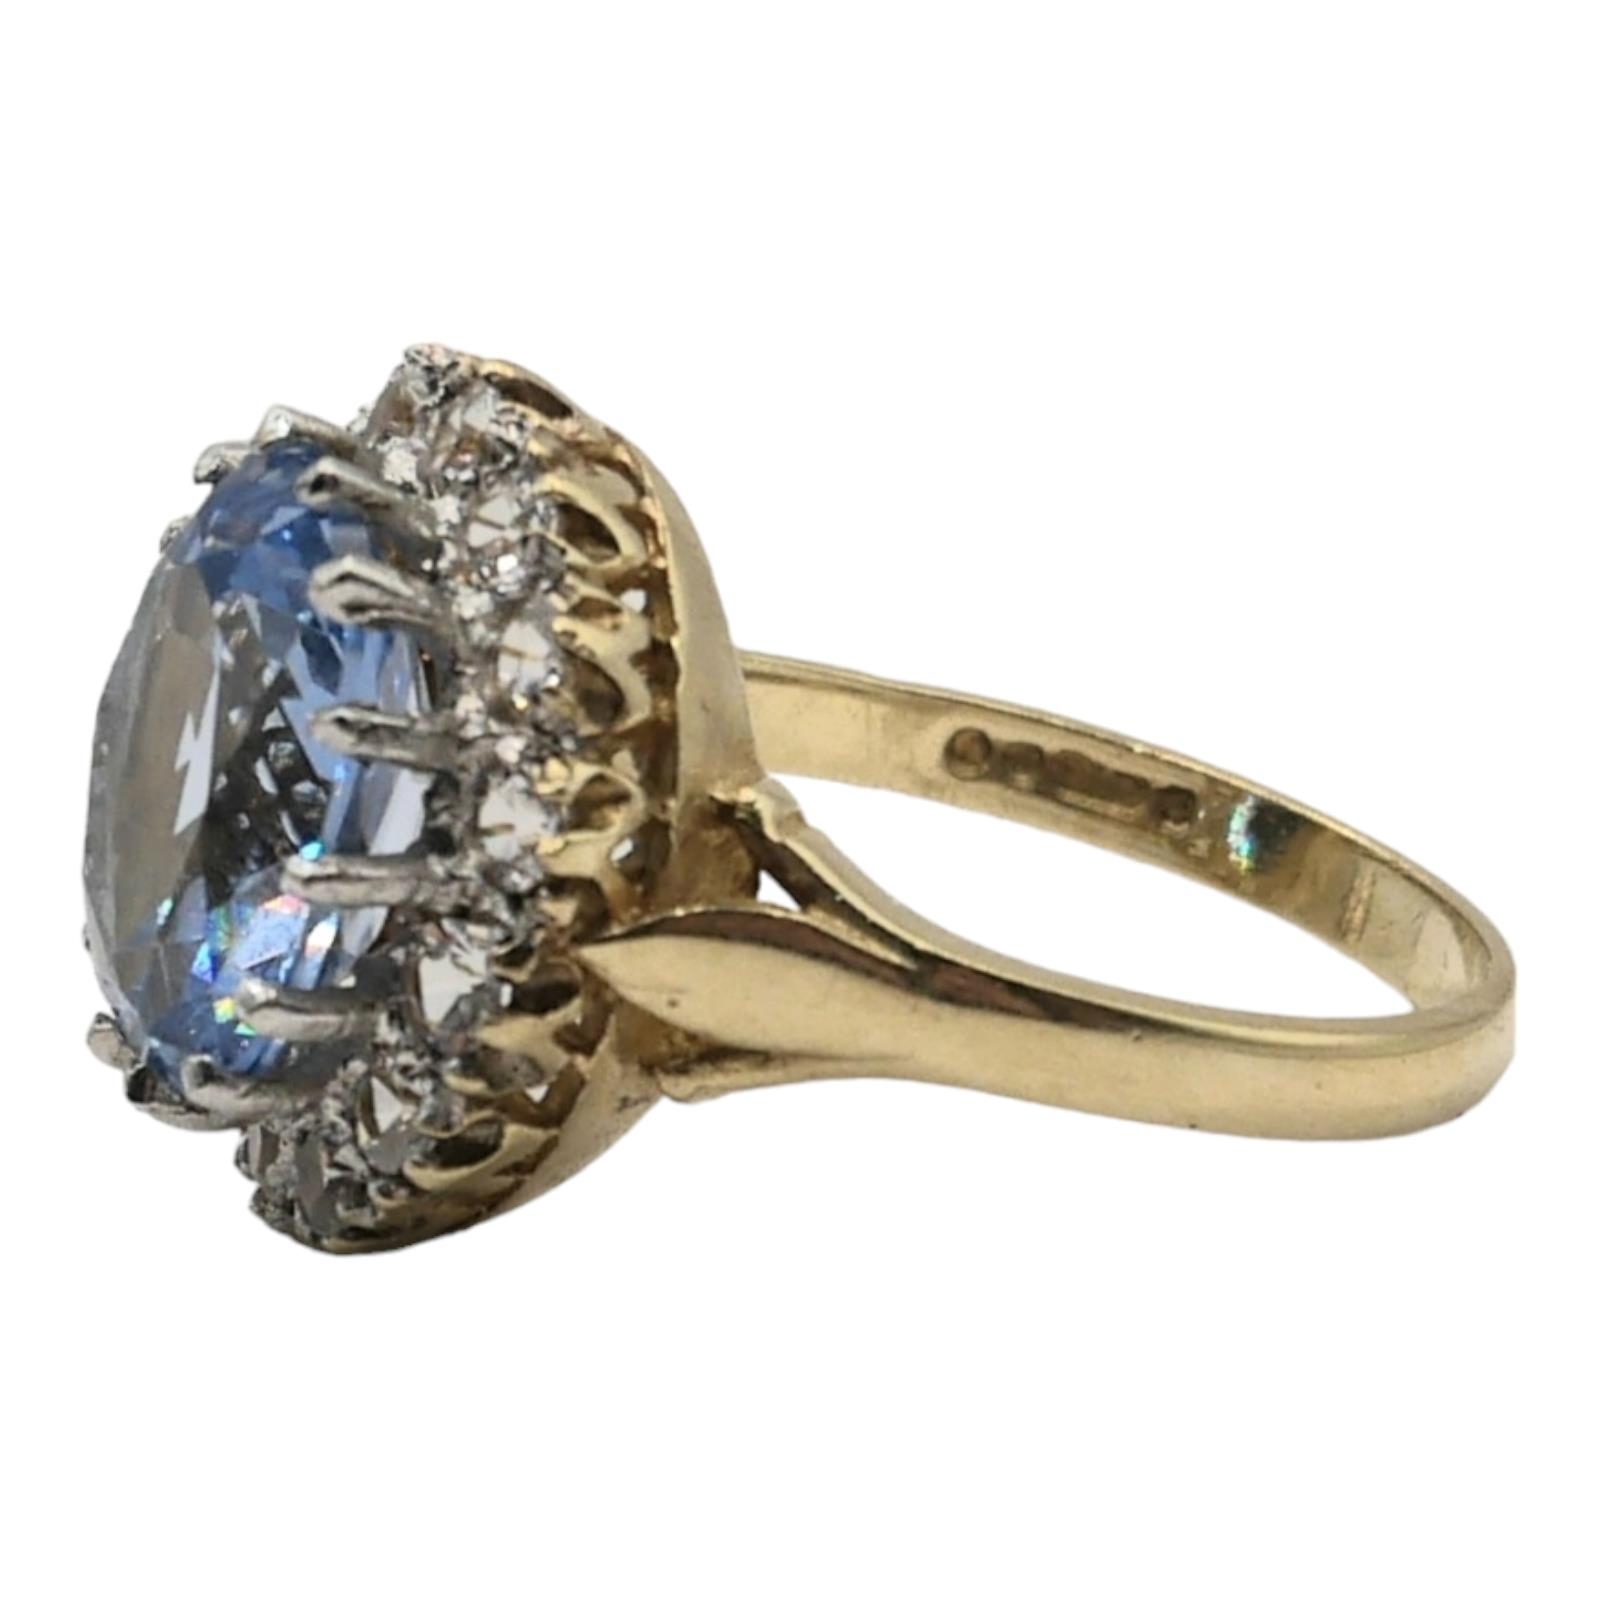 A VINTAGE 9CT GOLD, BLUE TOPAZ AND WHITE TANZANITE RING Having central oval cut blue topaz ( - Image 7 of 7